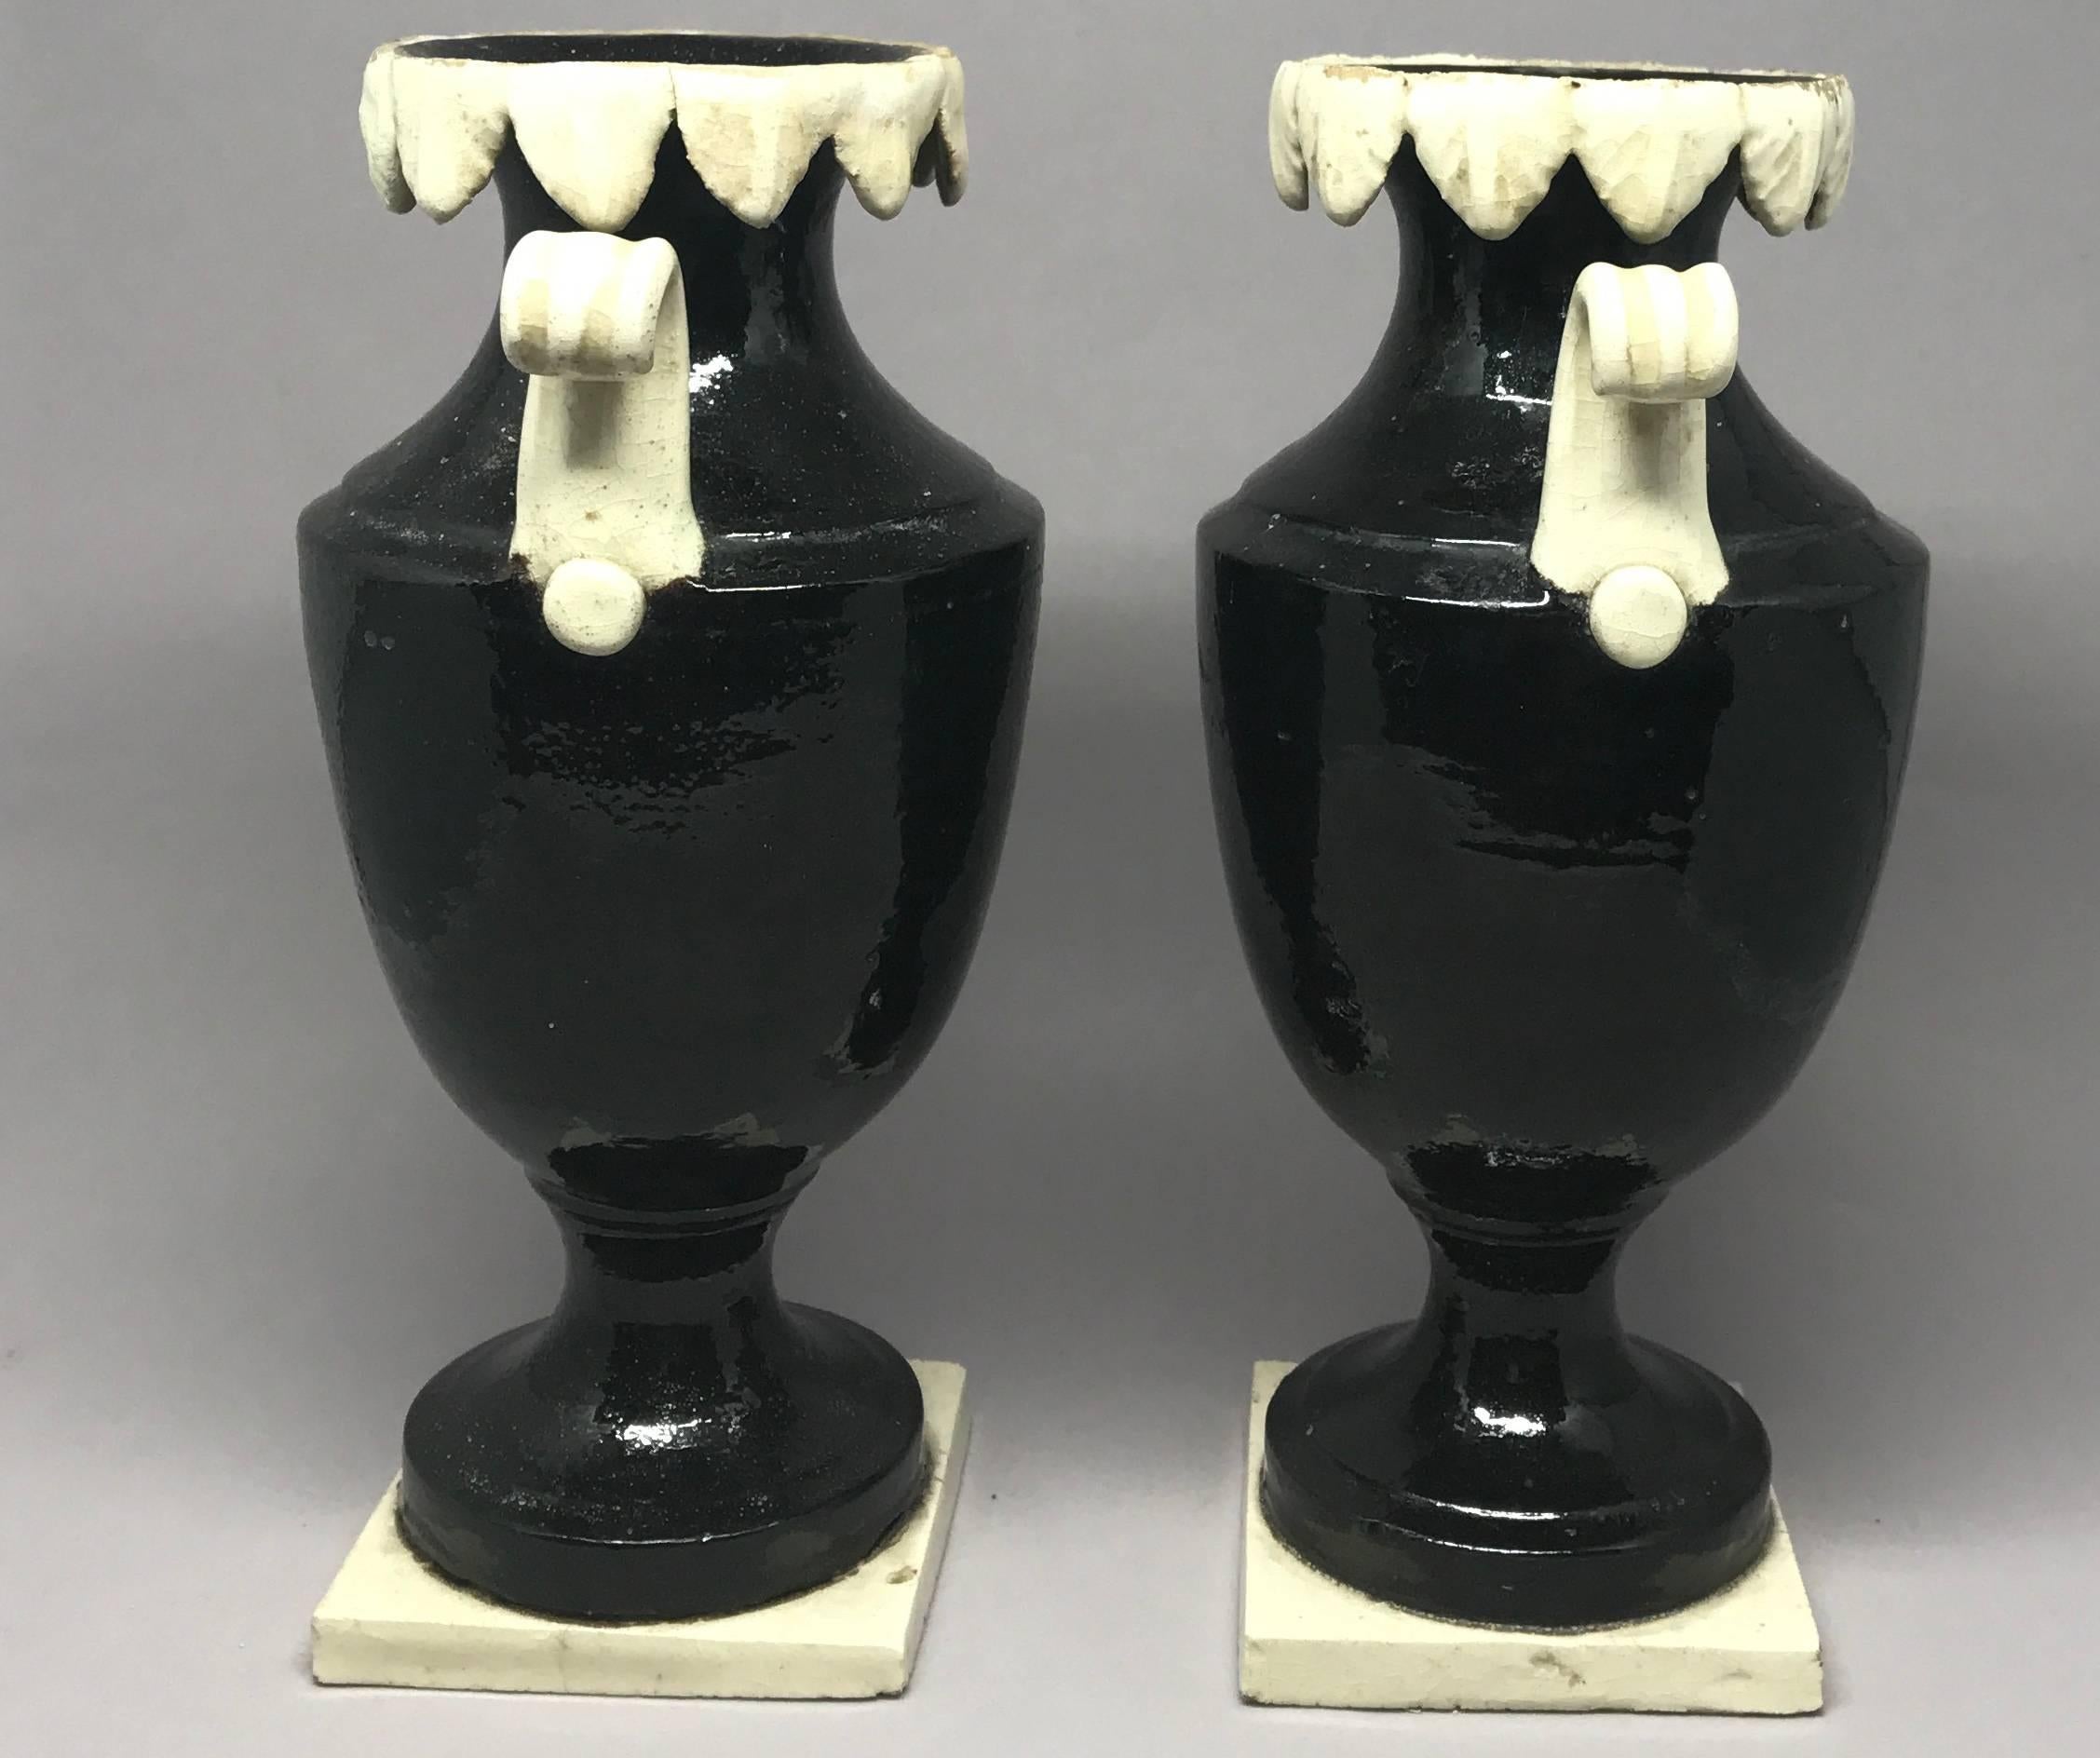 18th Century Pair of Neoclassical Black and White Giustiniani Urns For Sale